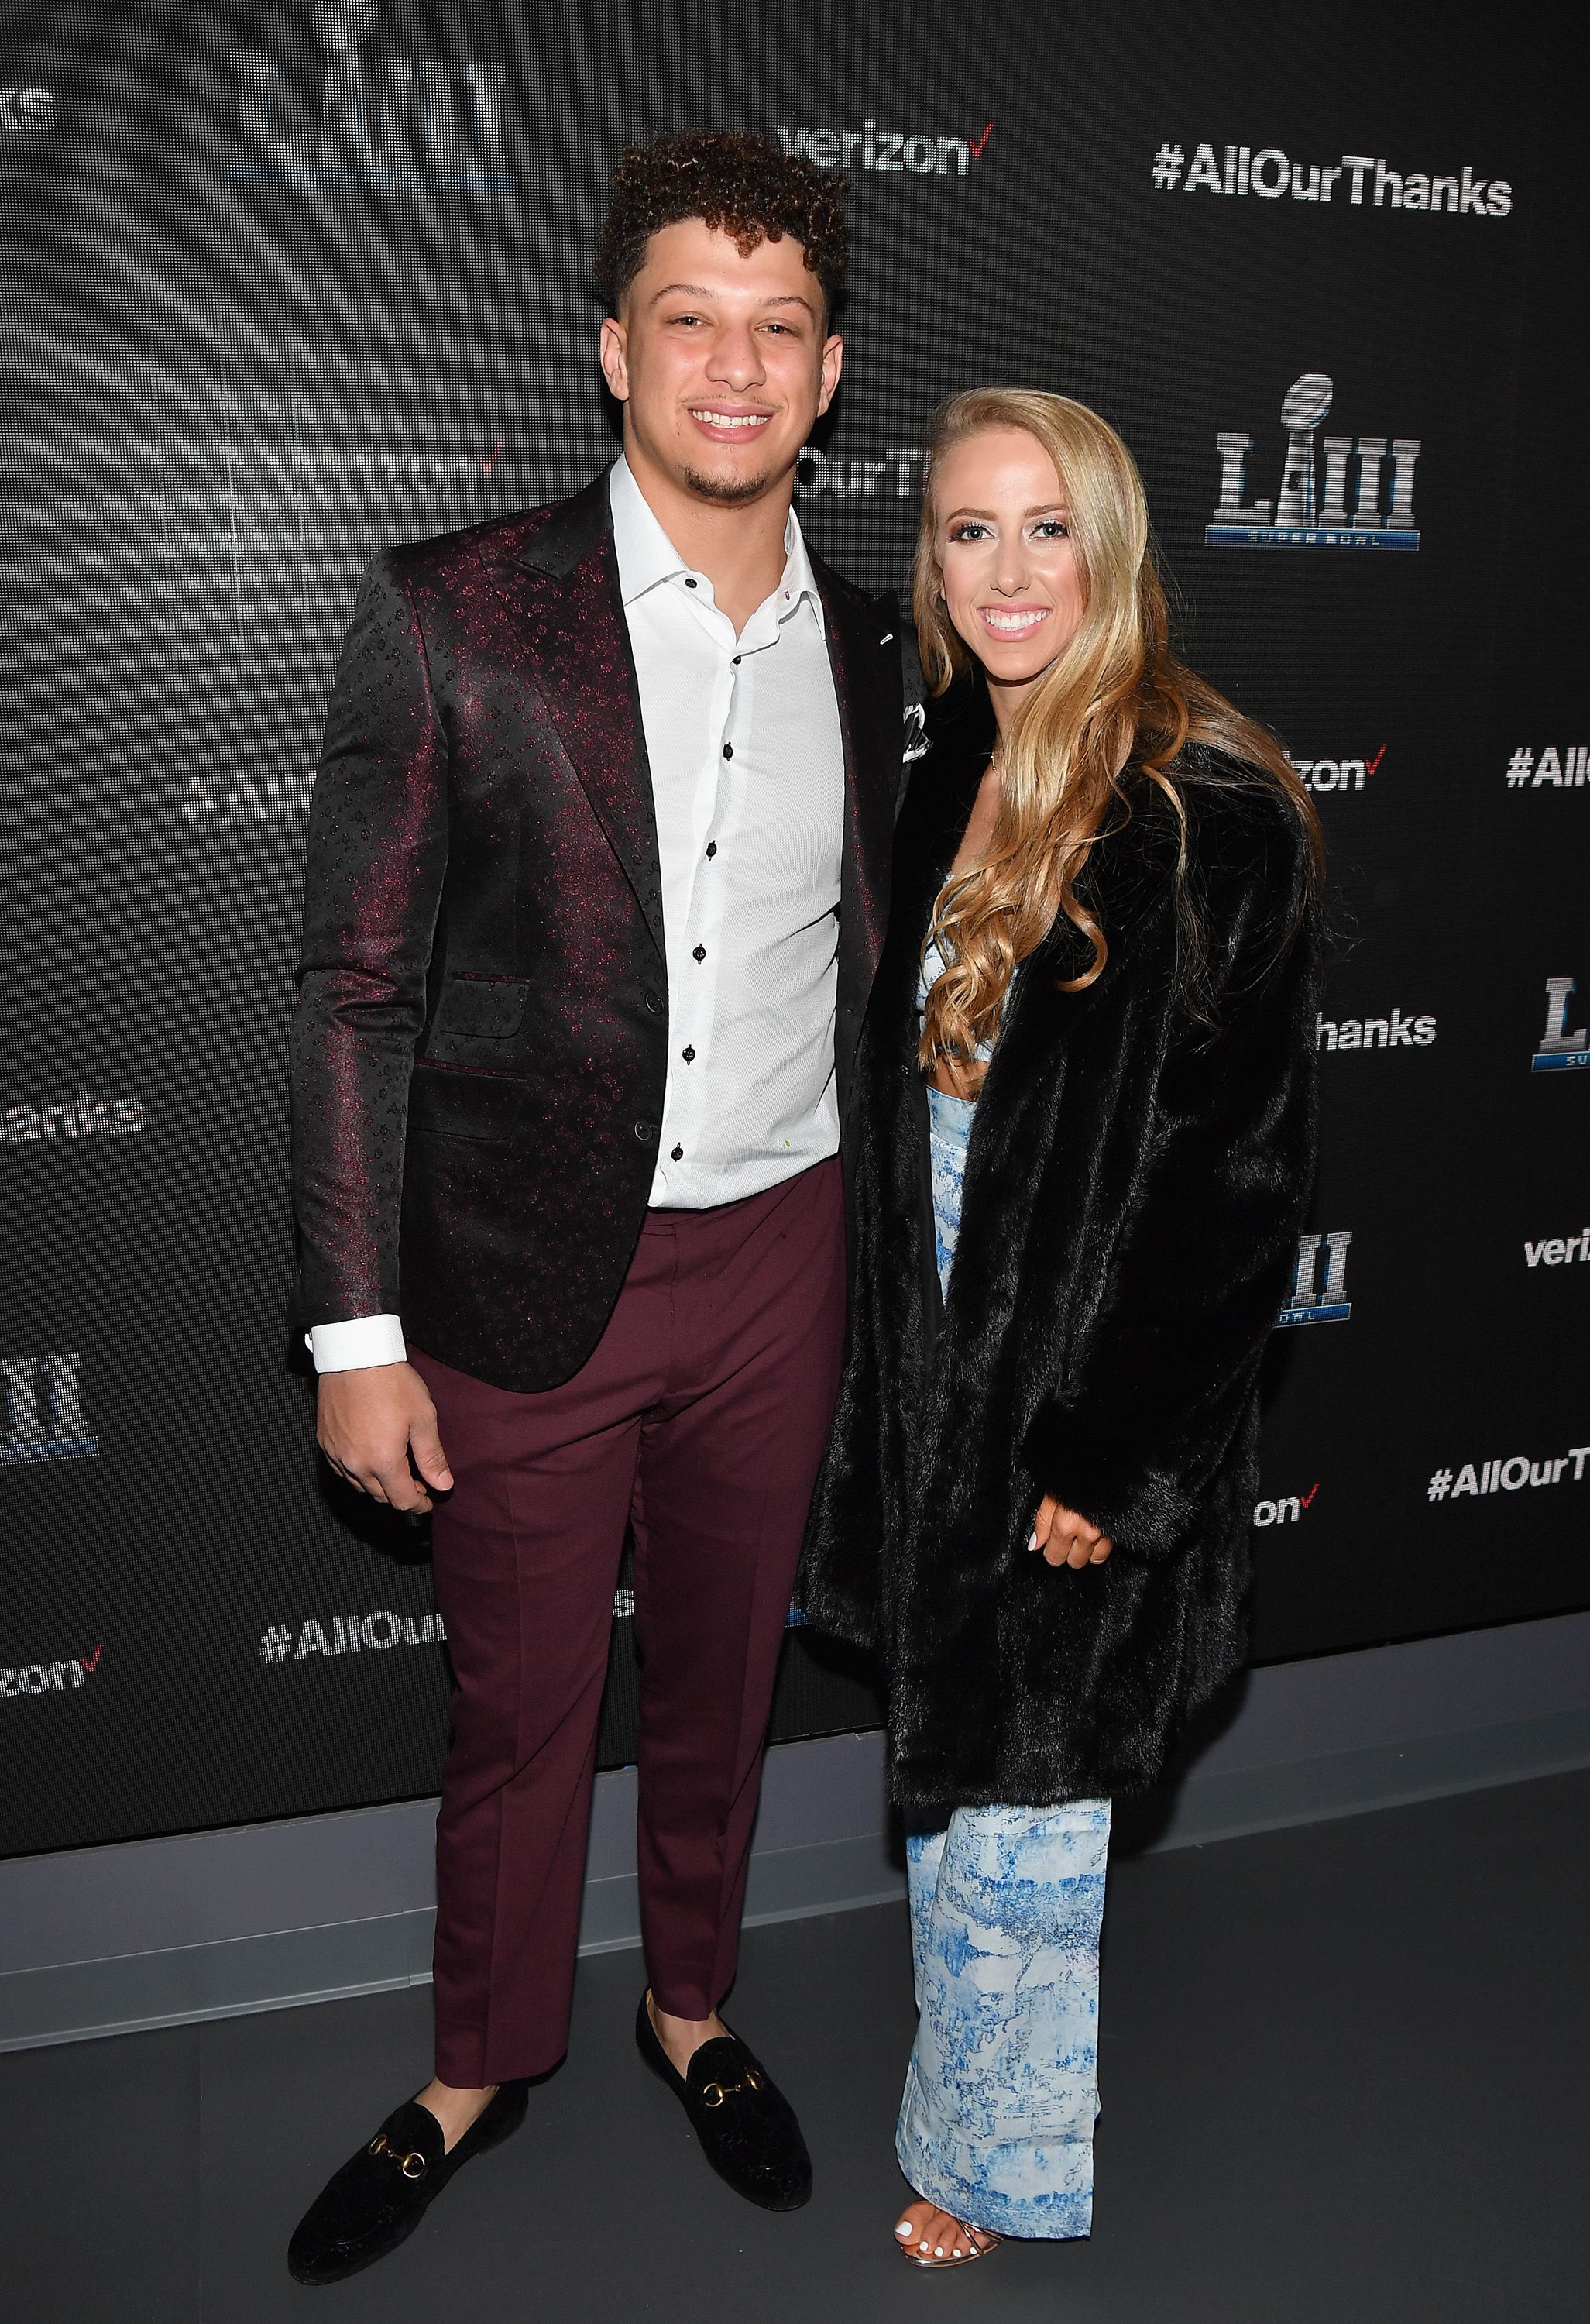 Patrick Mahomes II and Brittany Matthews attend the world premiere event for "The Team That Wouldn't Be Here" documentary hosted by Verizon on January 31, 2019 | Photo: Getty Images